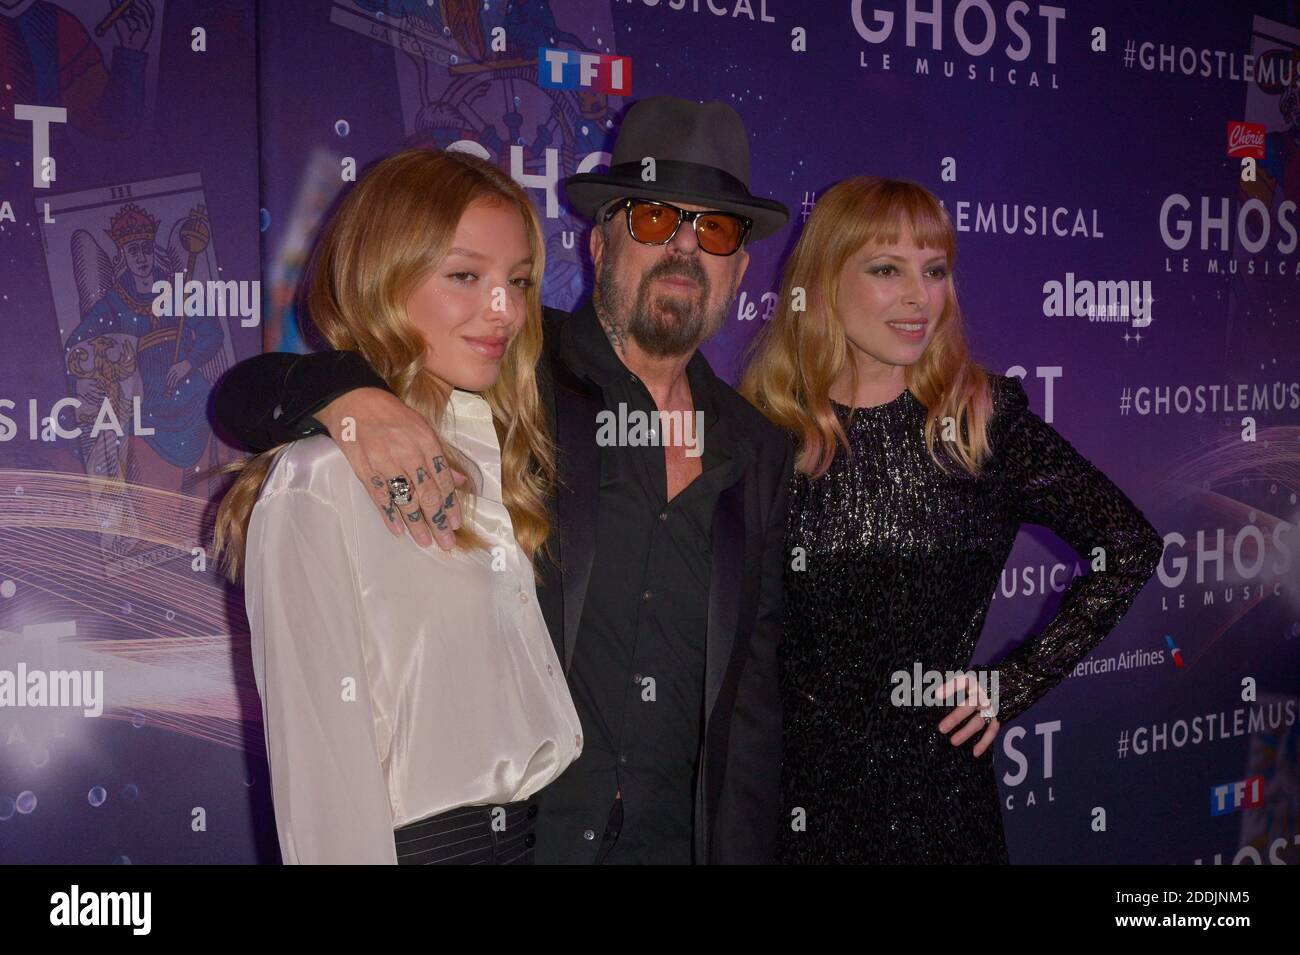 Dave Stewart With His Wife Anouska And Daughter, Anouska Fisz 'Aka